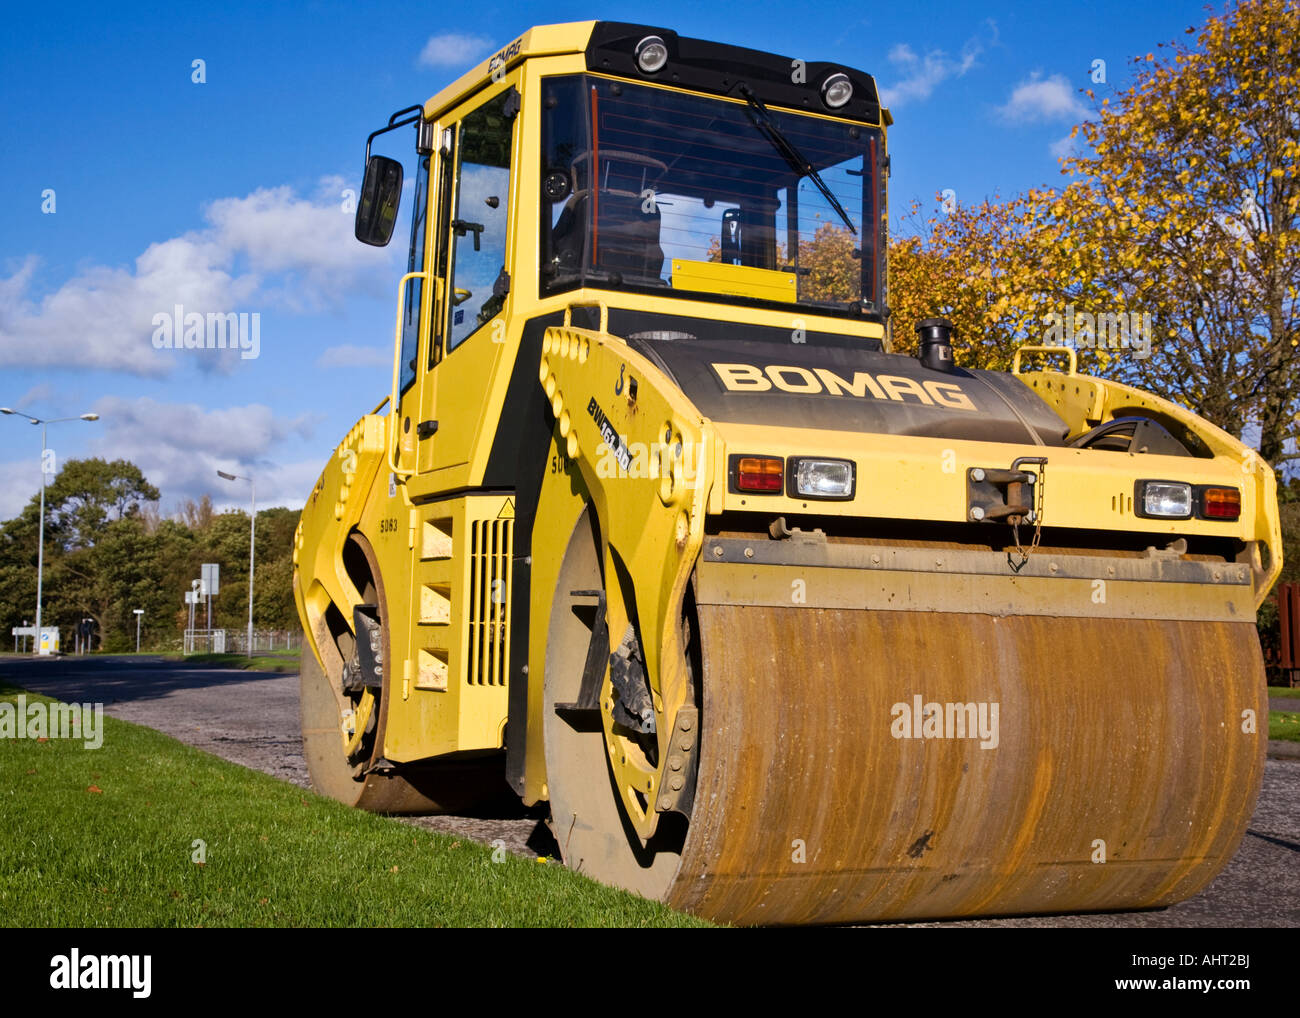 Bomag road roller heavy equipment used to repair and surface highways Stock  Photo - Alamy